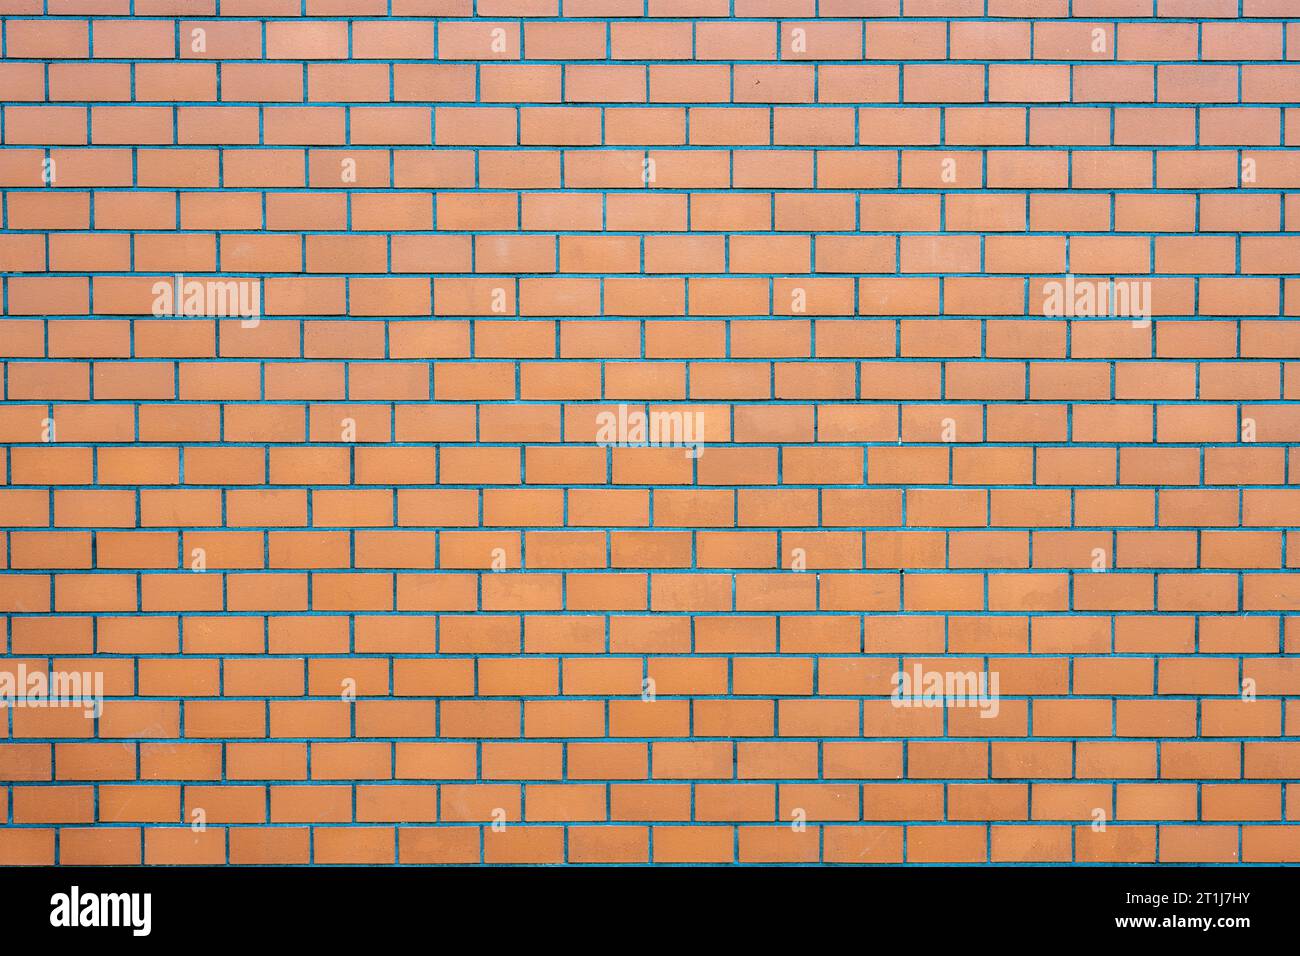 Background from a wall made of orange bricks Stock Photo